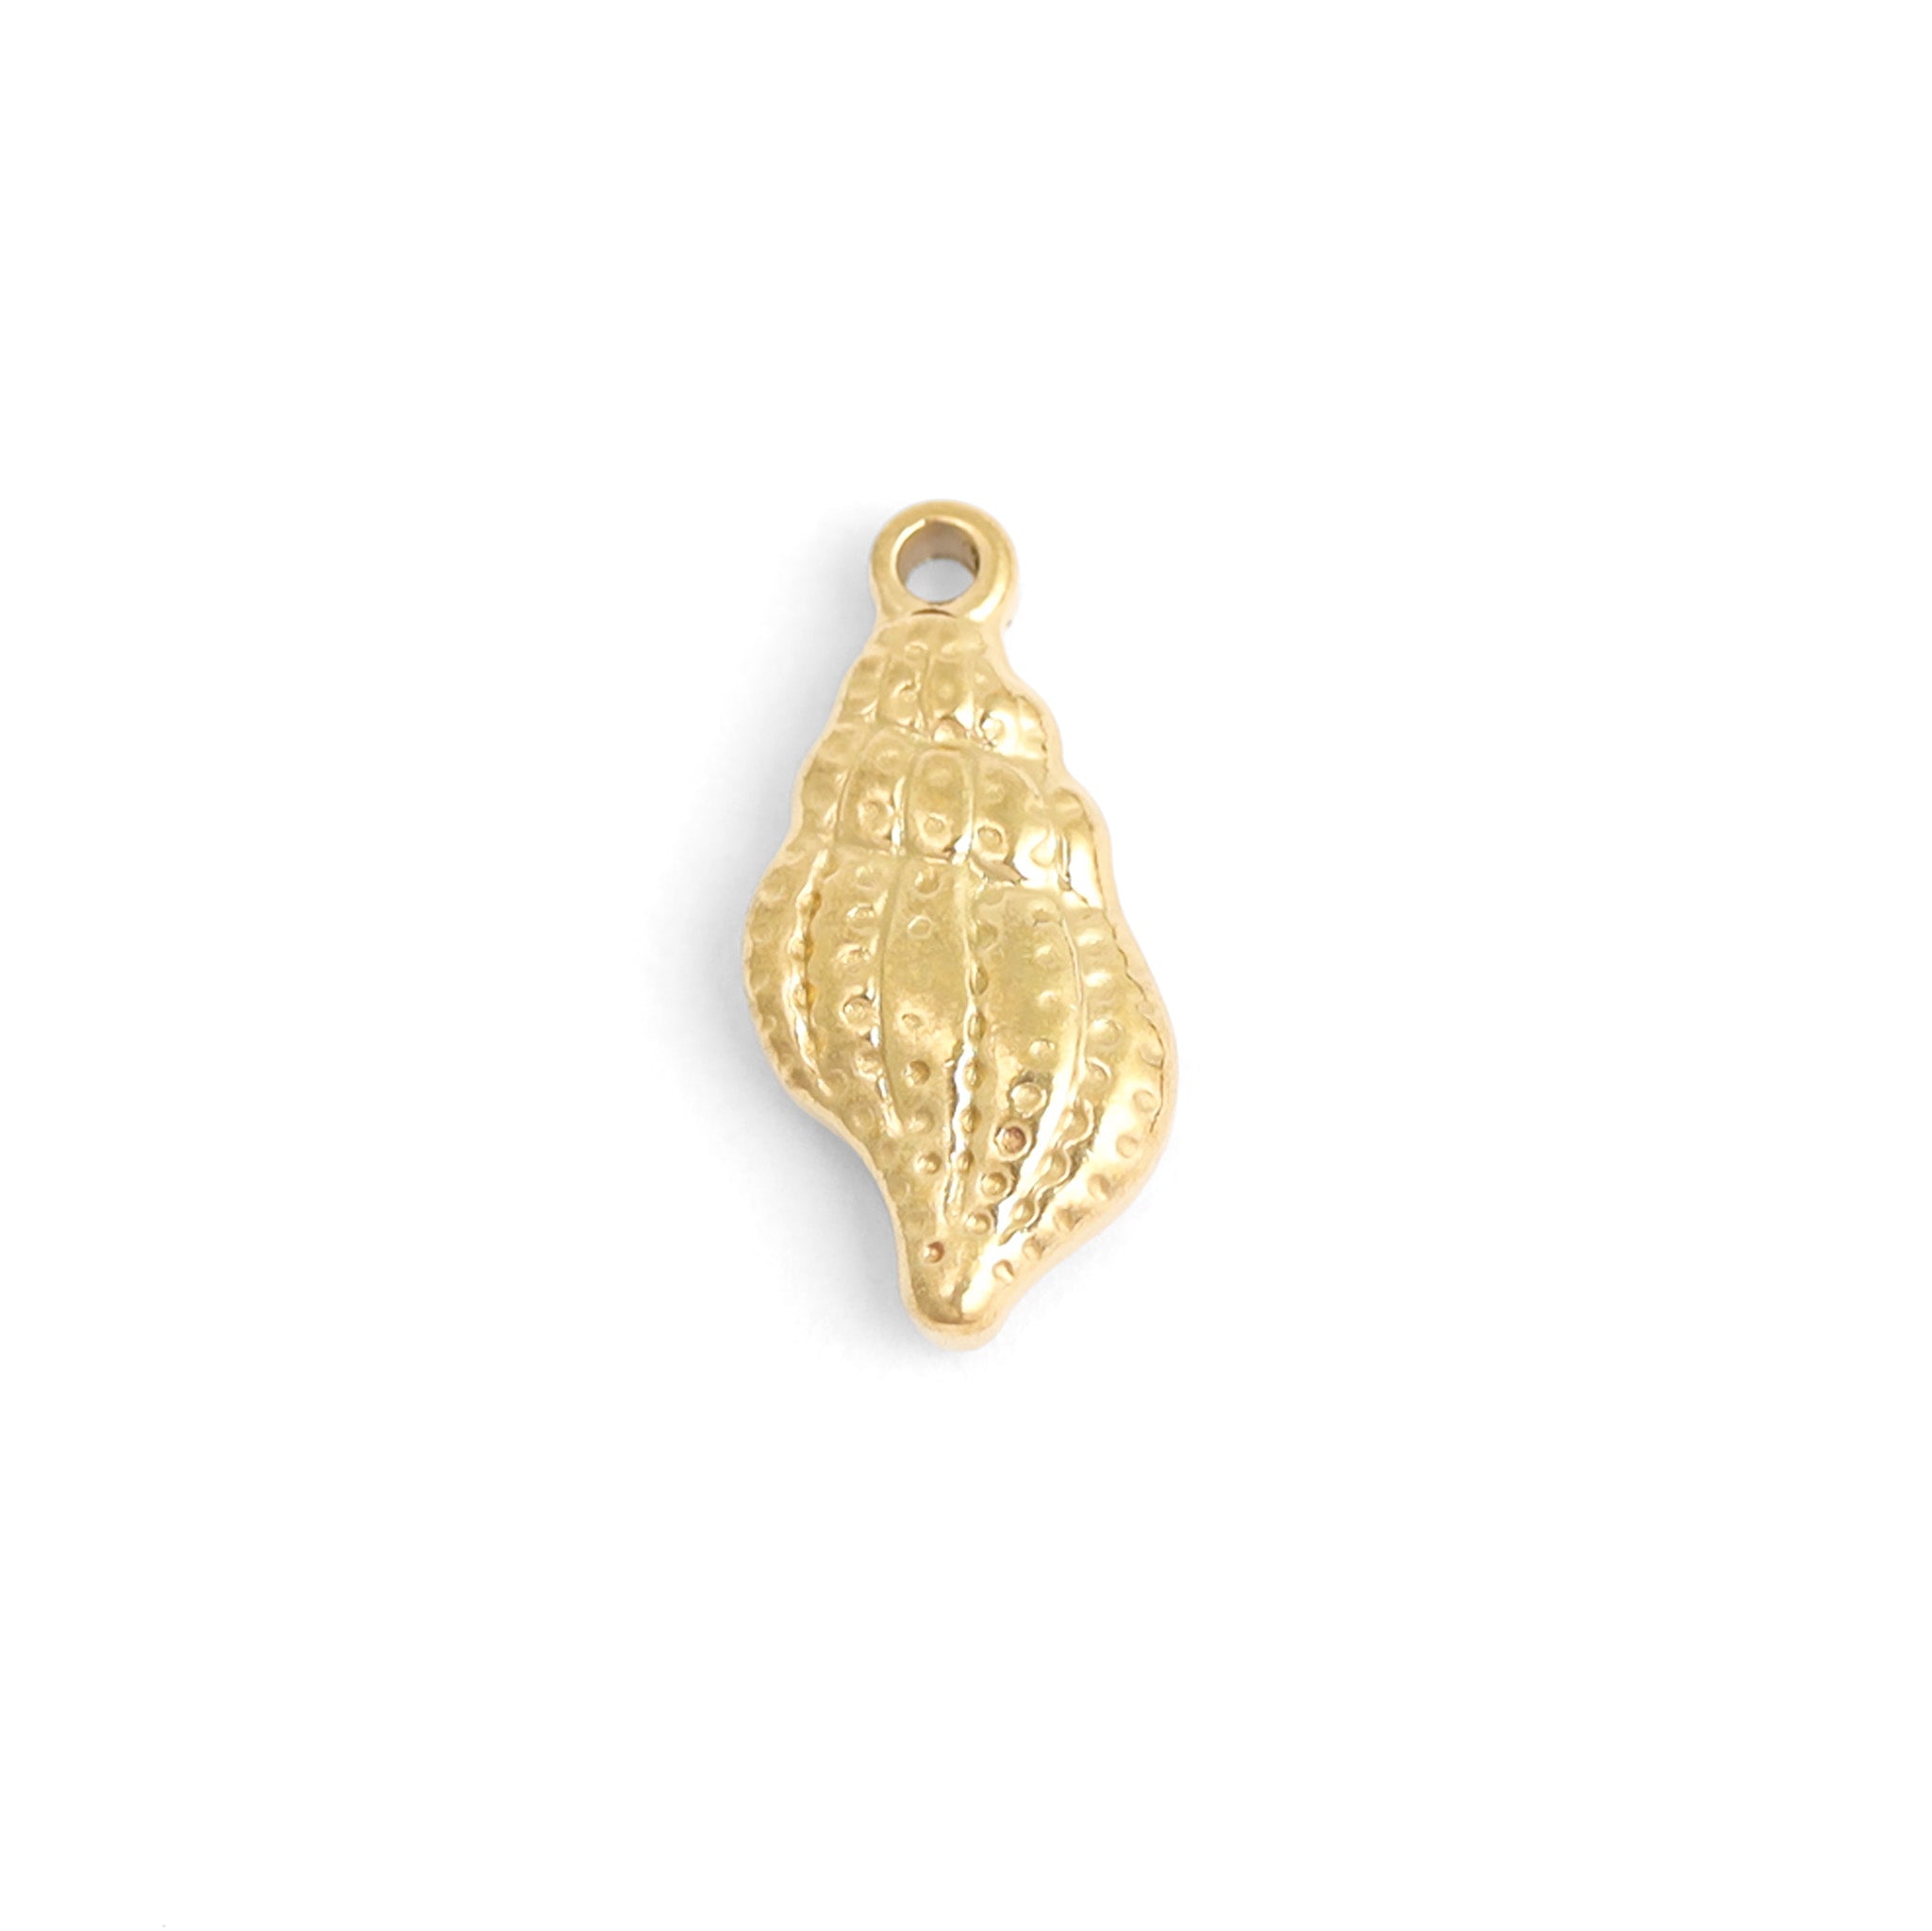 18K Gold PVD Stainless Steel Conch Seashell Charm / PDL0098